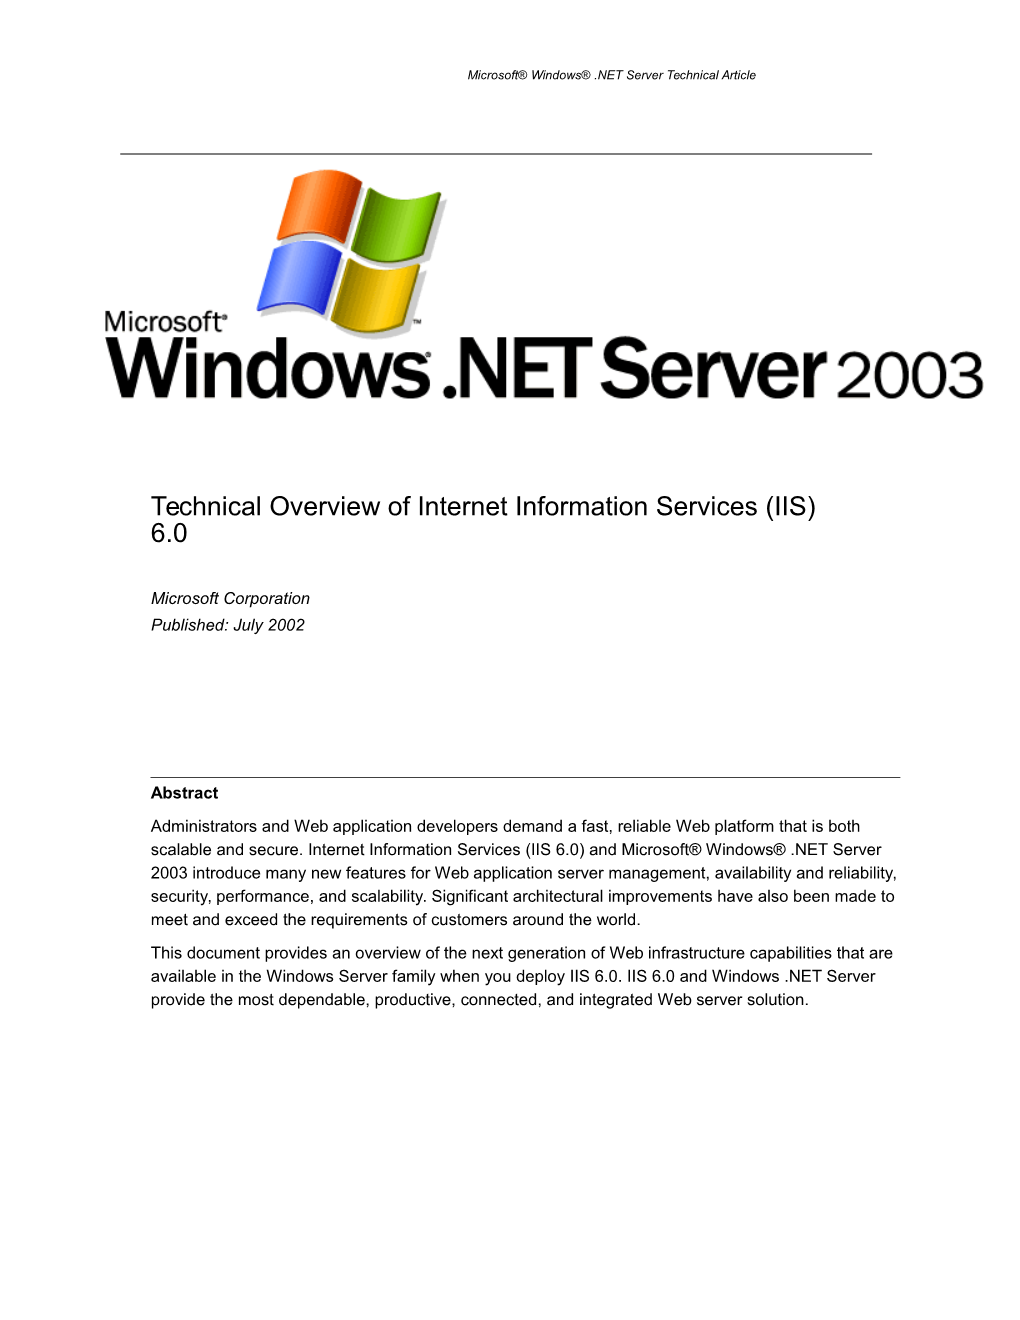 Technical Overview of Internet Information Services (IIS) 6.0